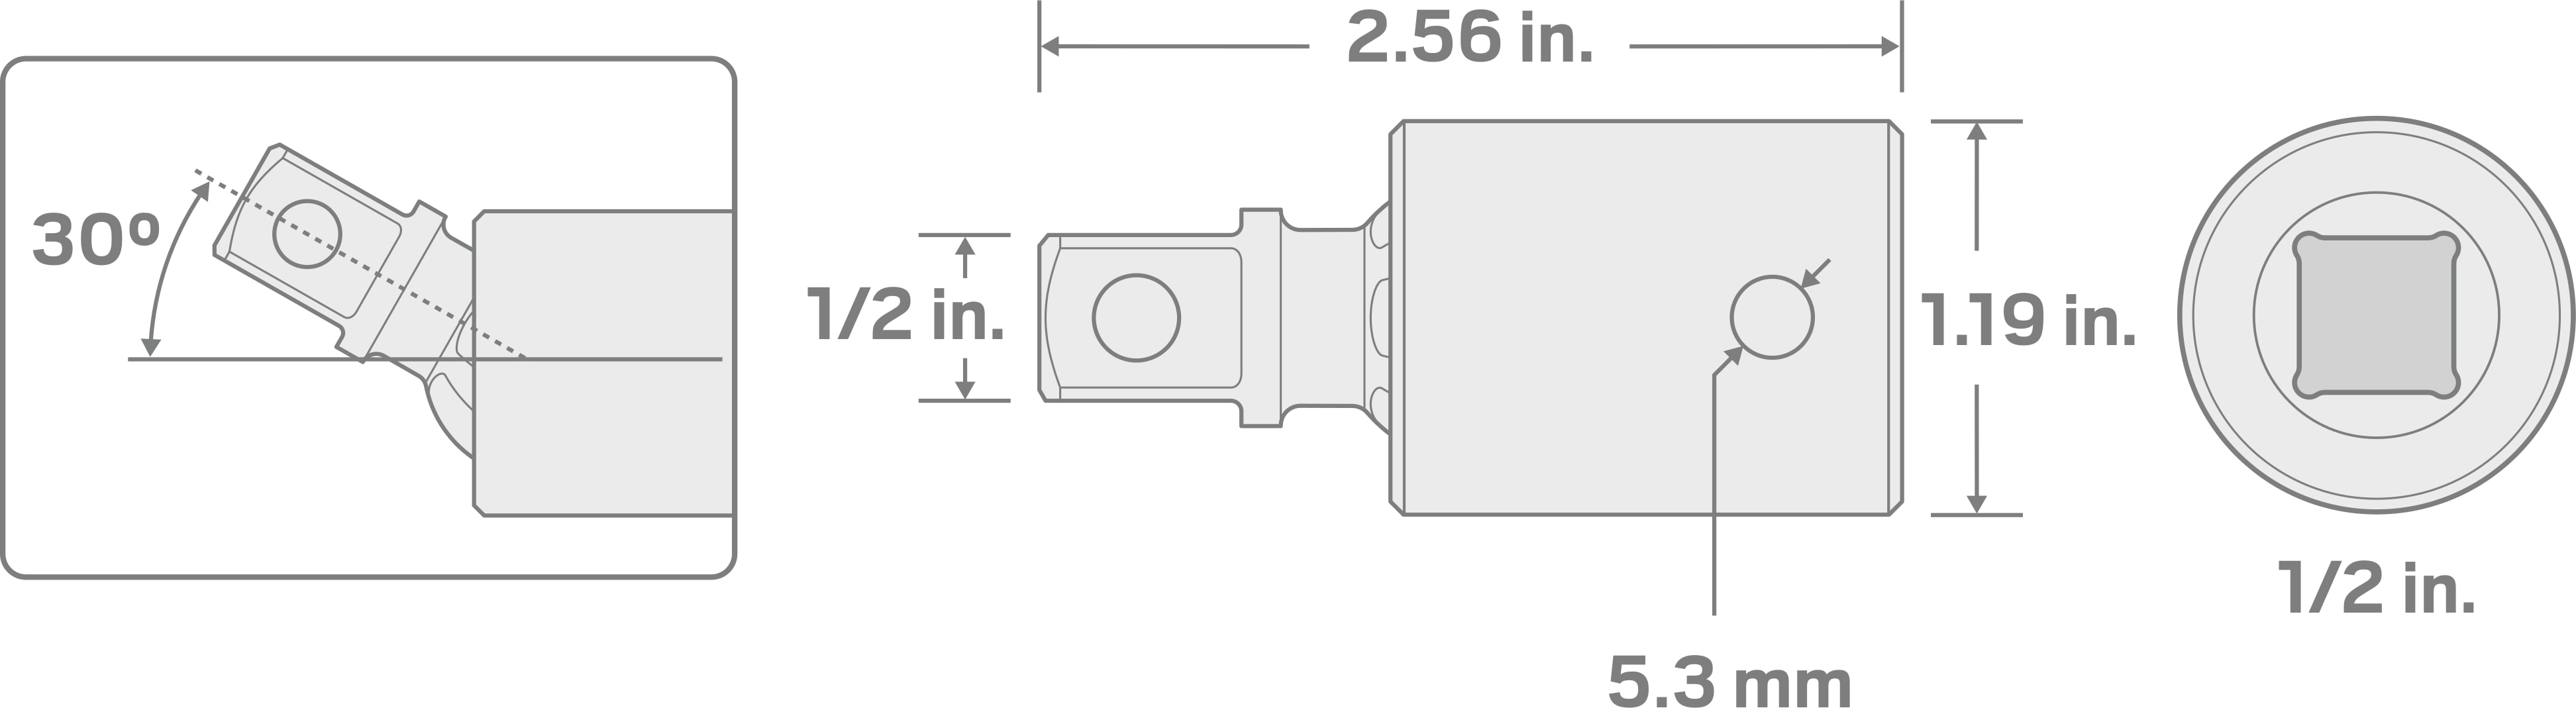 Specs for 1/2 Inch Drive Impact Universal Joint